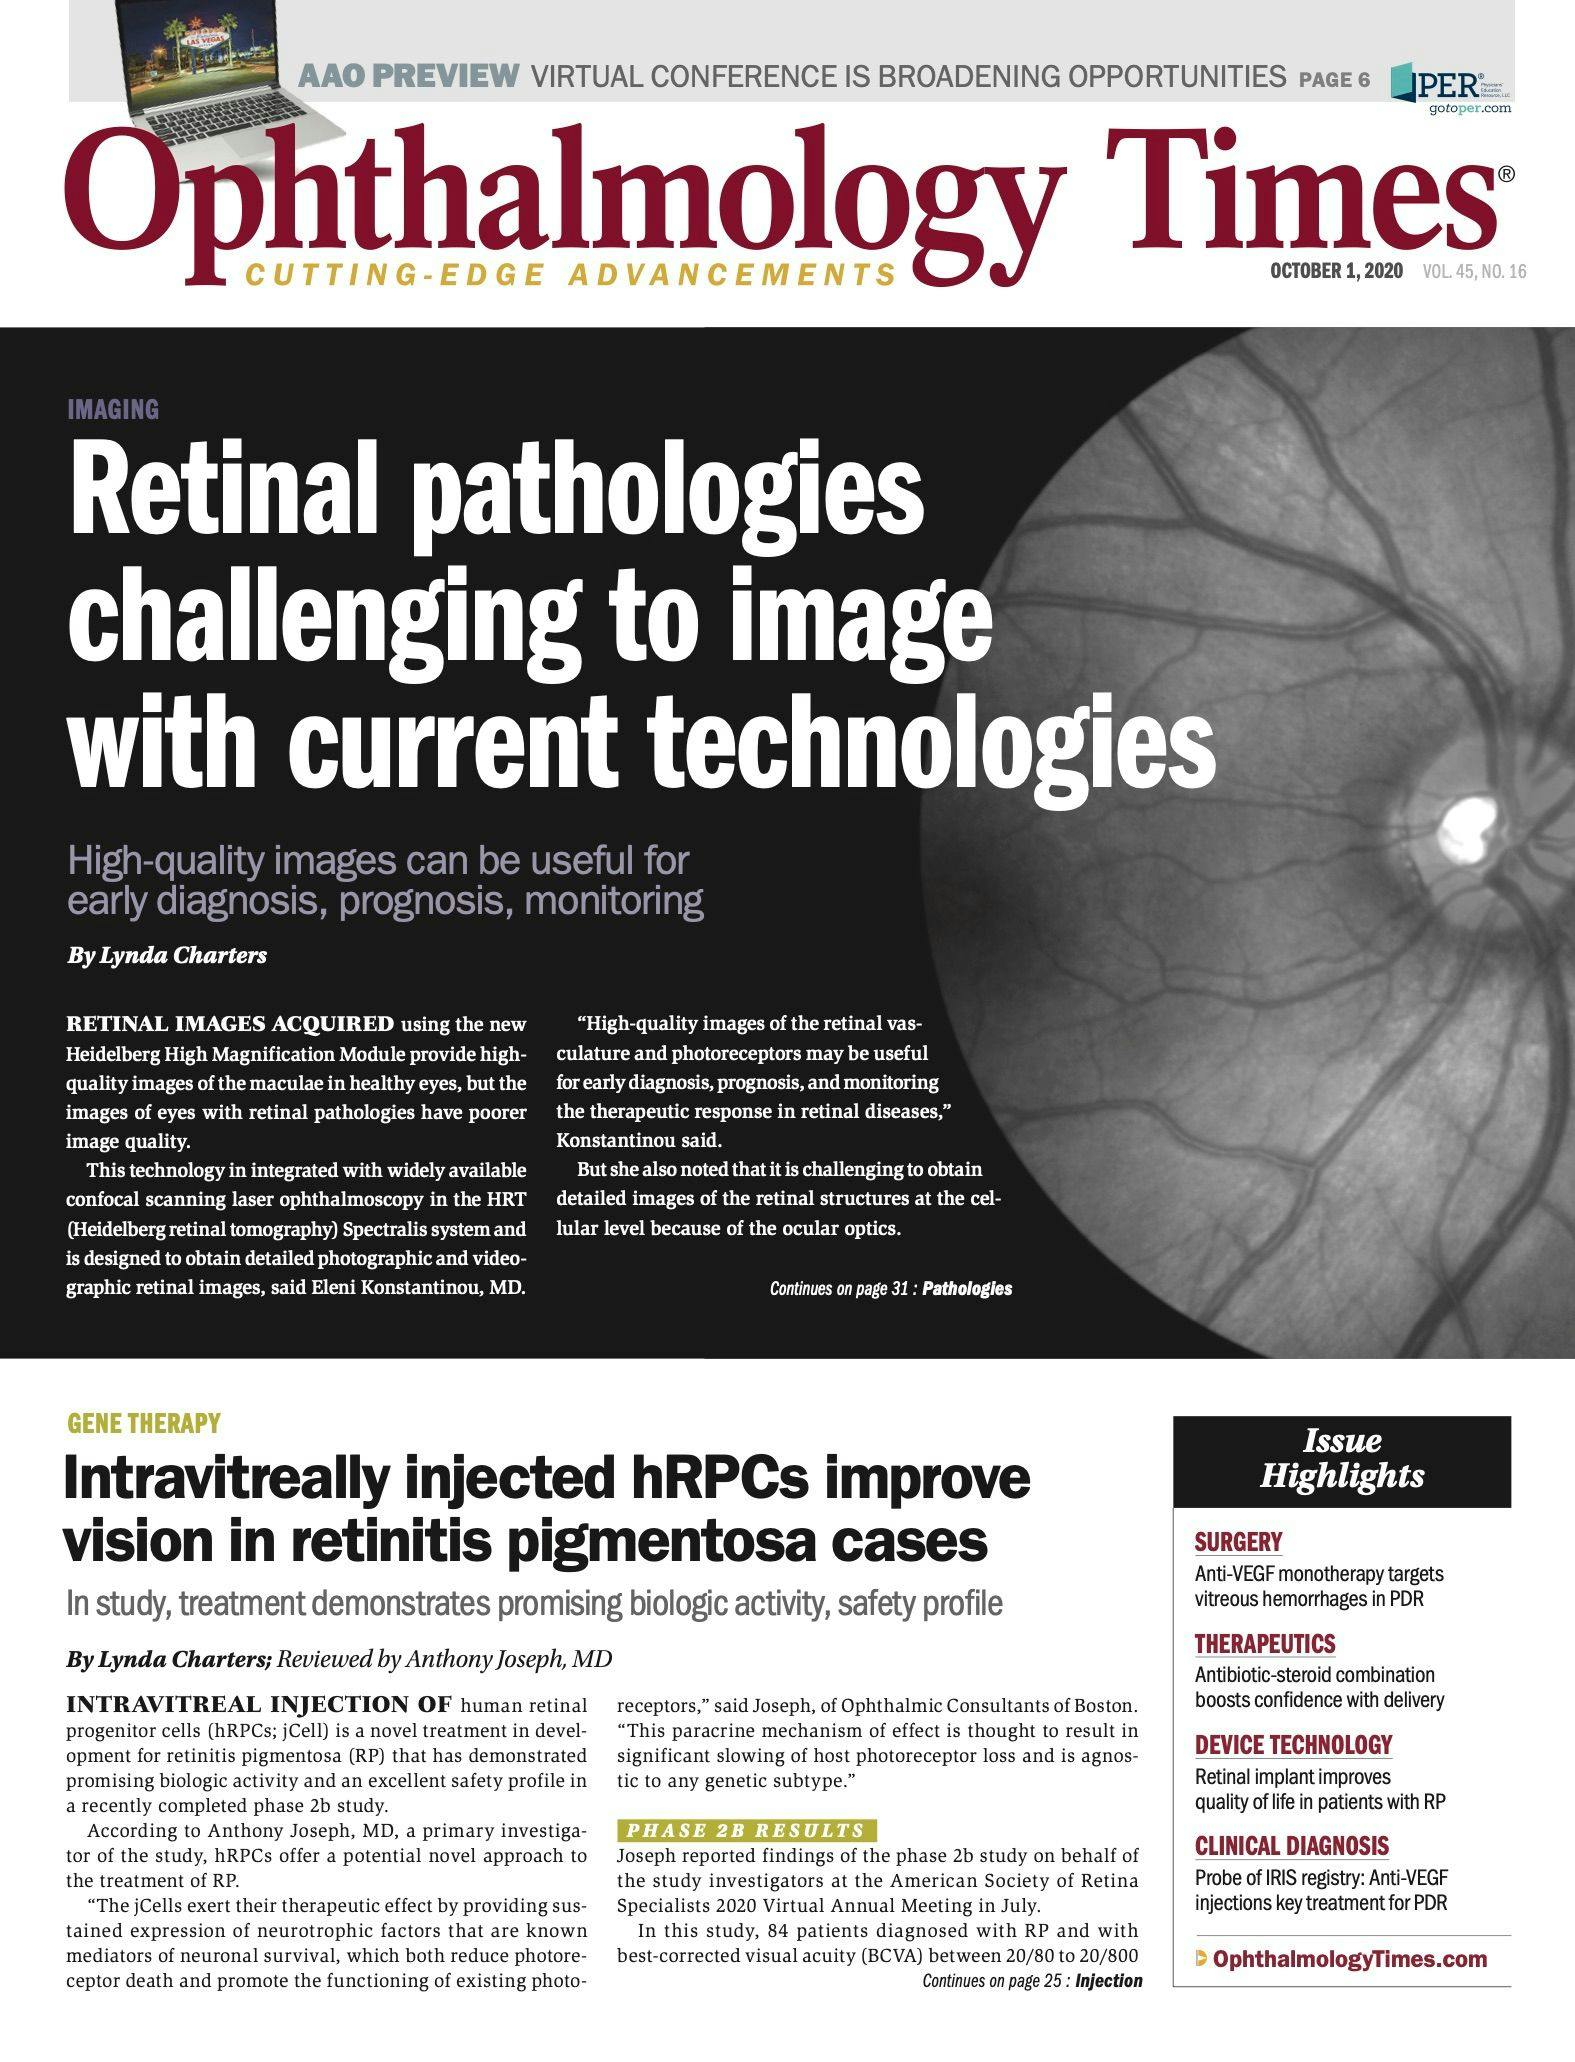 Ophthalmology Times: Oct. 1, 2020